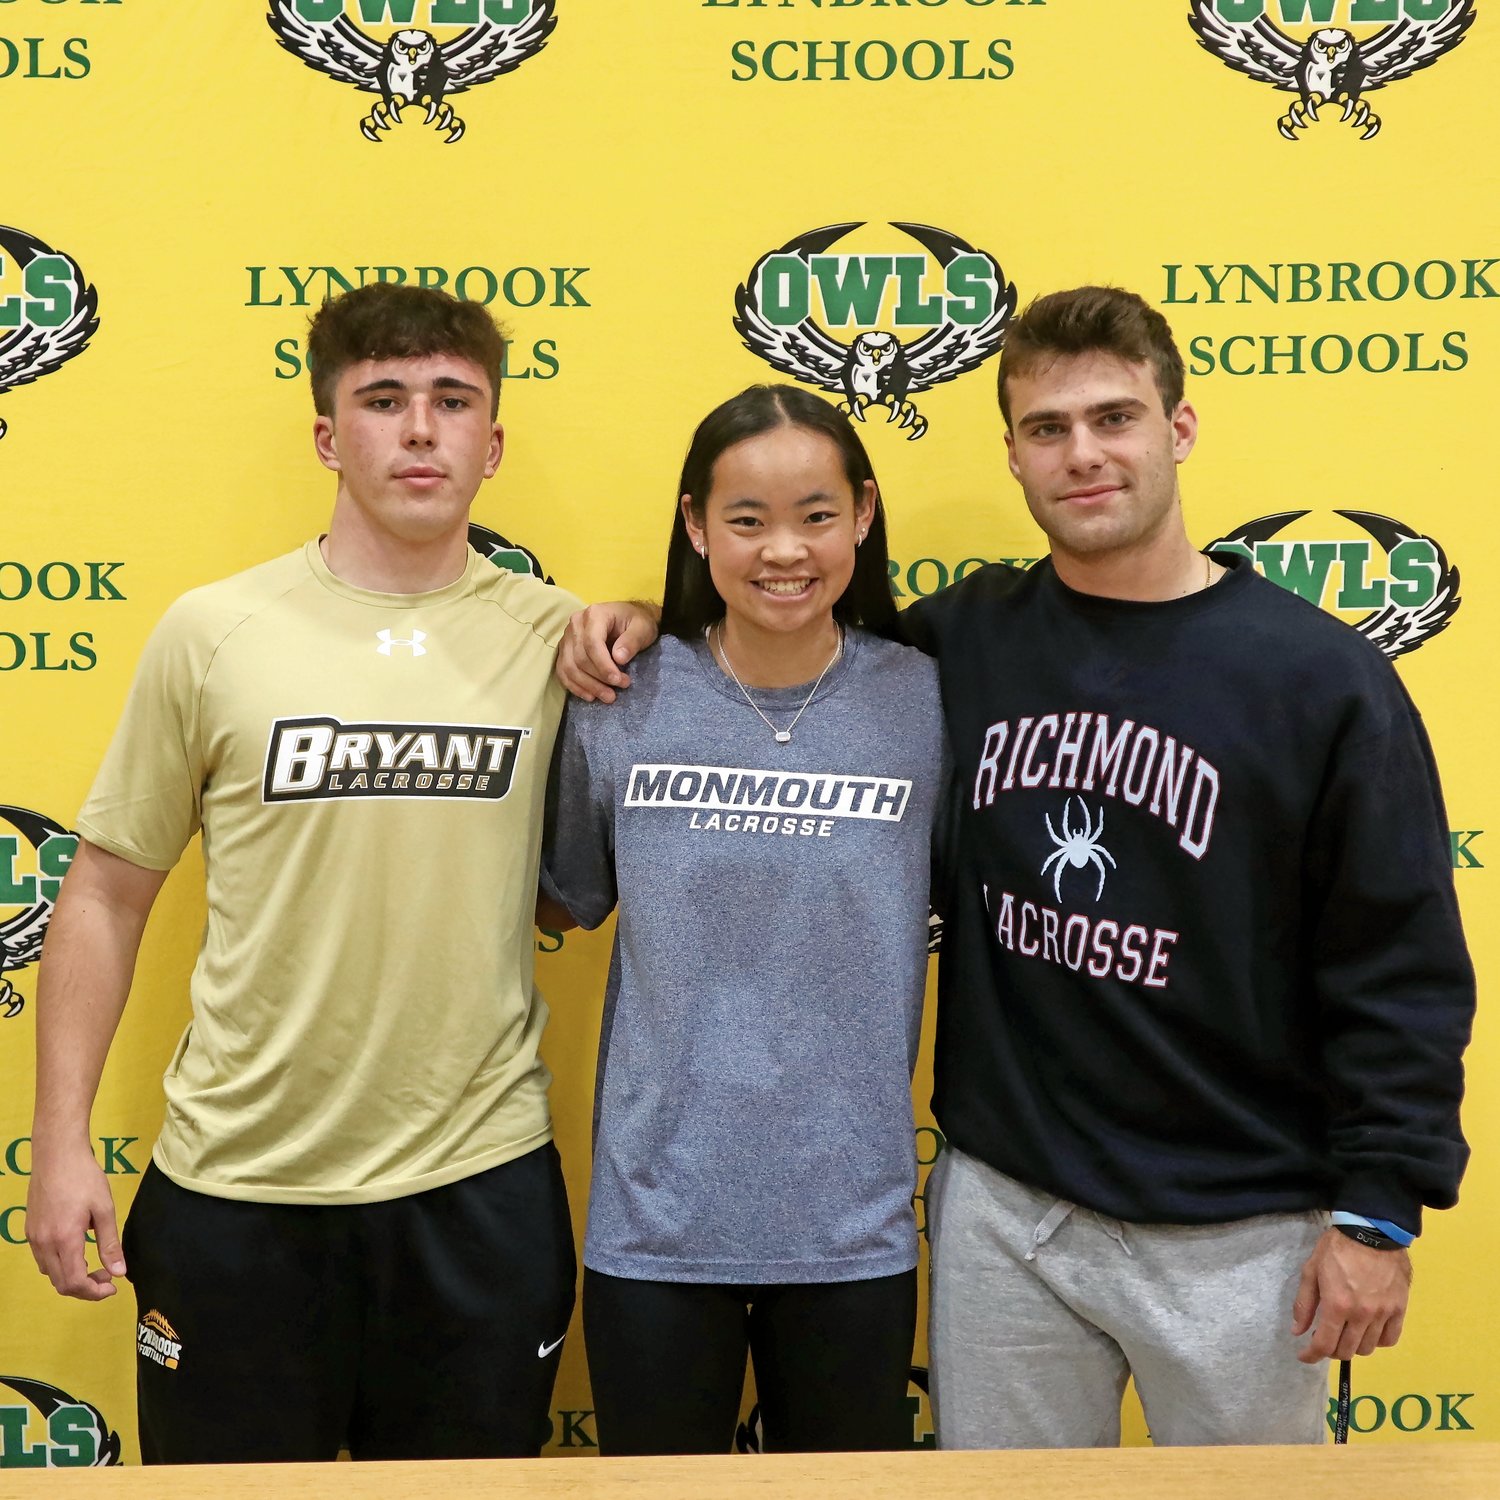 From left, Lynbrook High School athletes Max Dantona, Sara Curley and Michael Fagen signed letters of intent to play at various universities on Nov. 9.